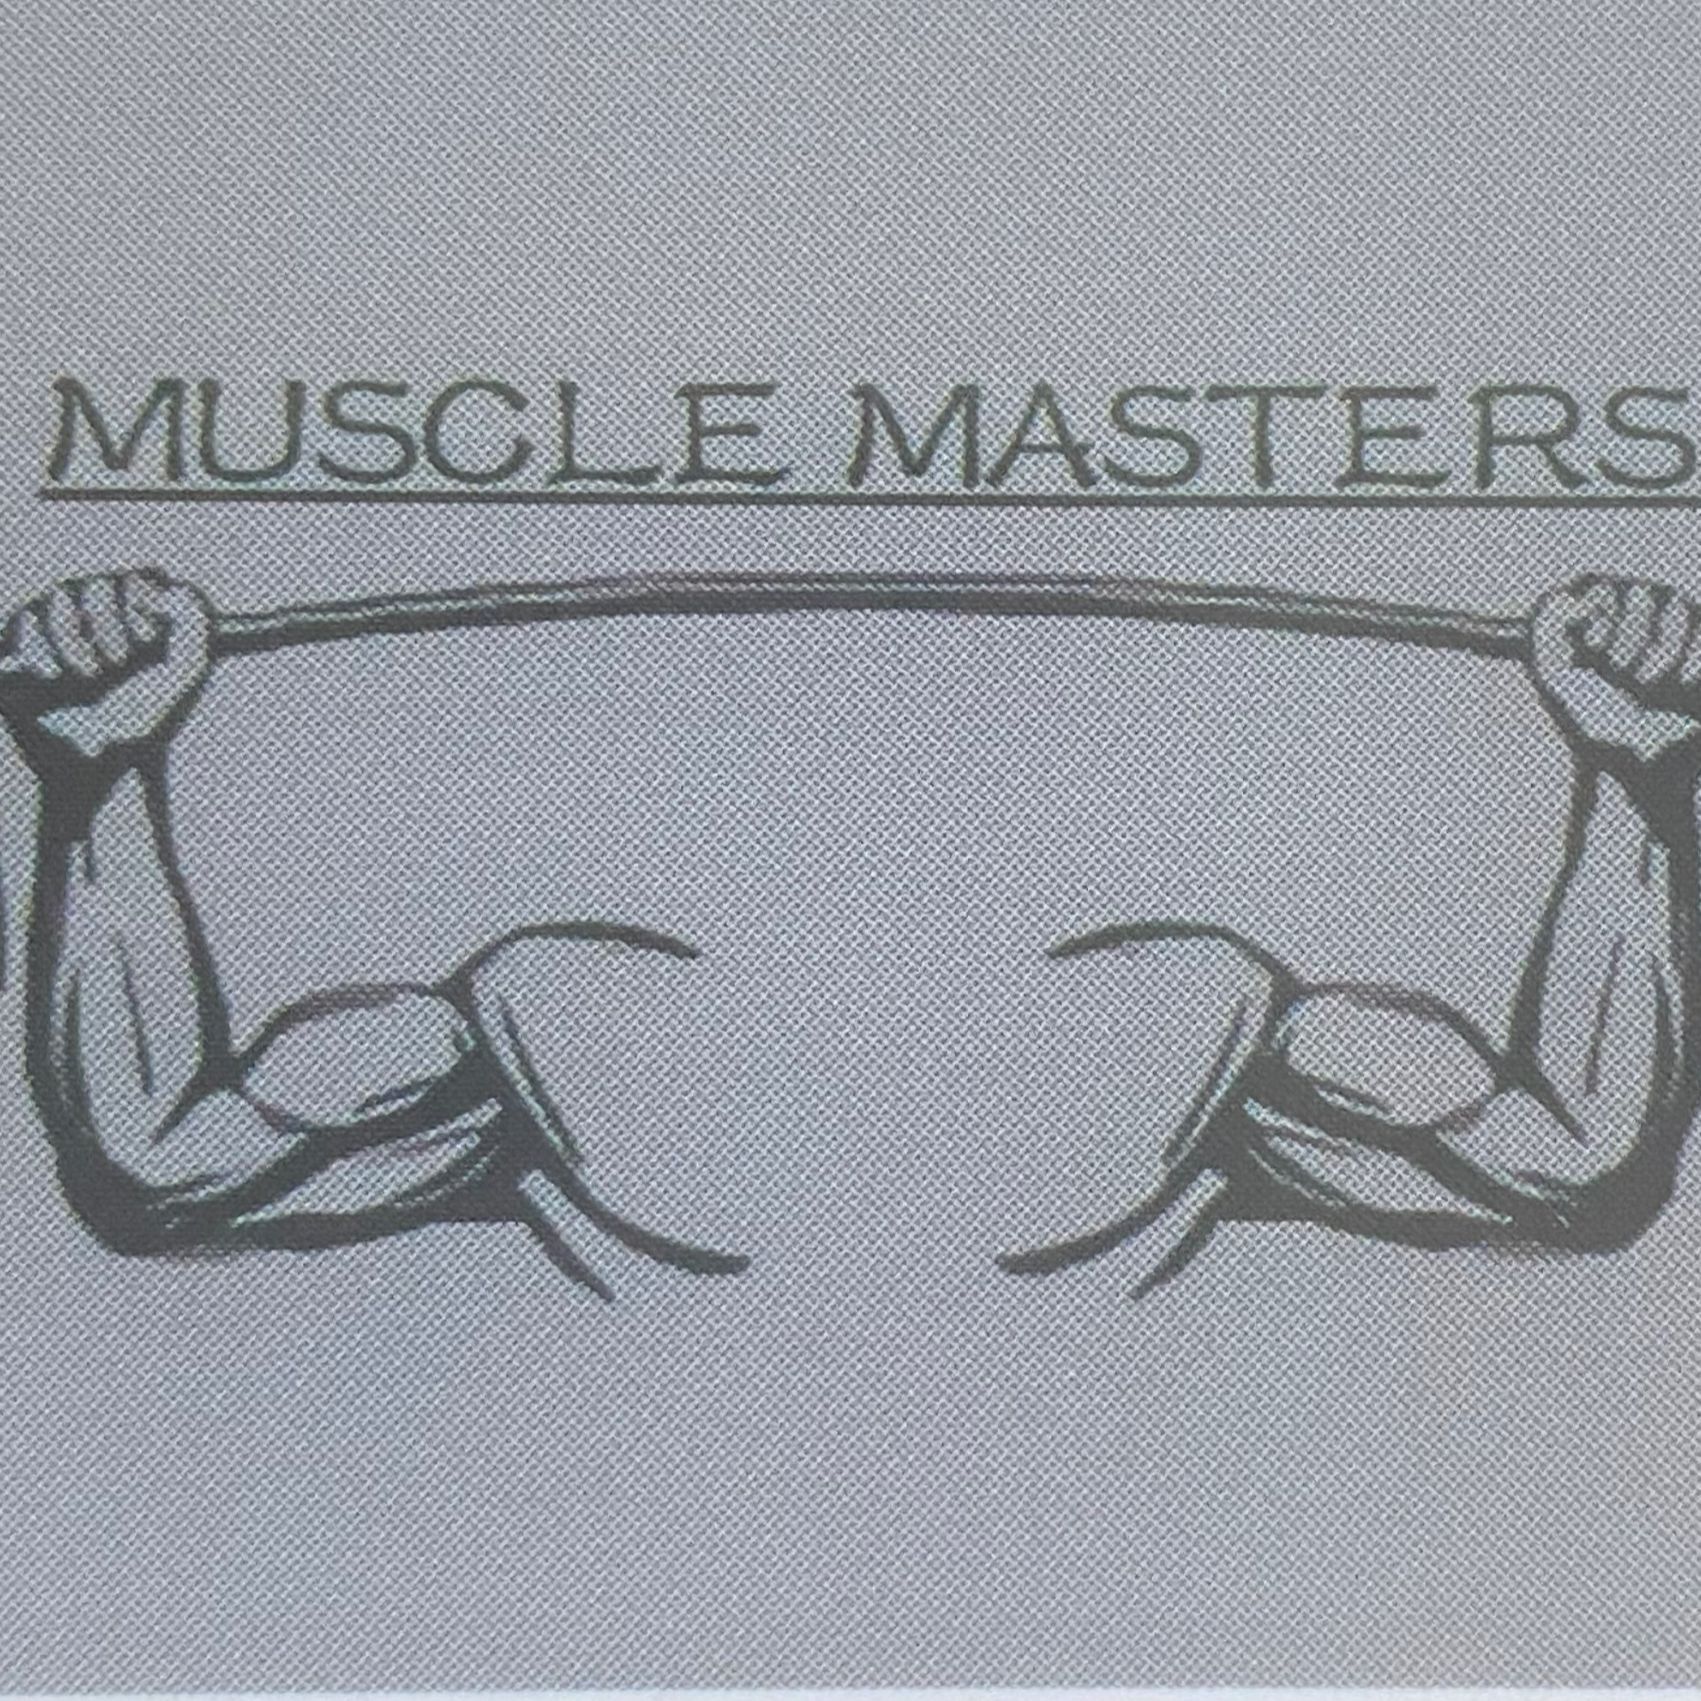 MuscleMasters Massage and Waxing Studio Catering To Men, 1639 Post Rd, Warwick, 02888